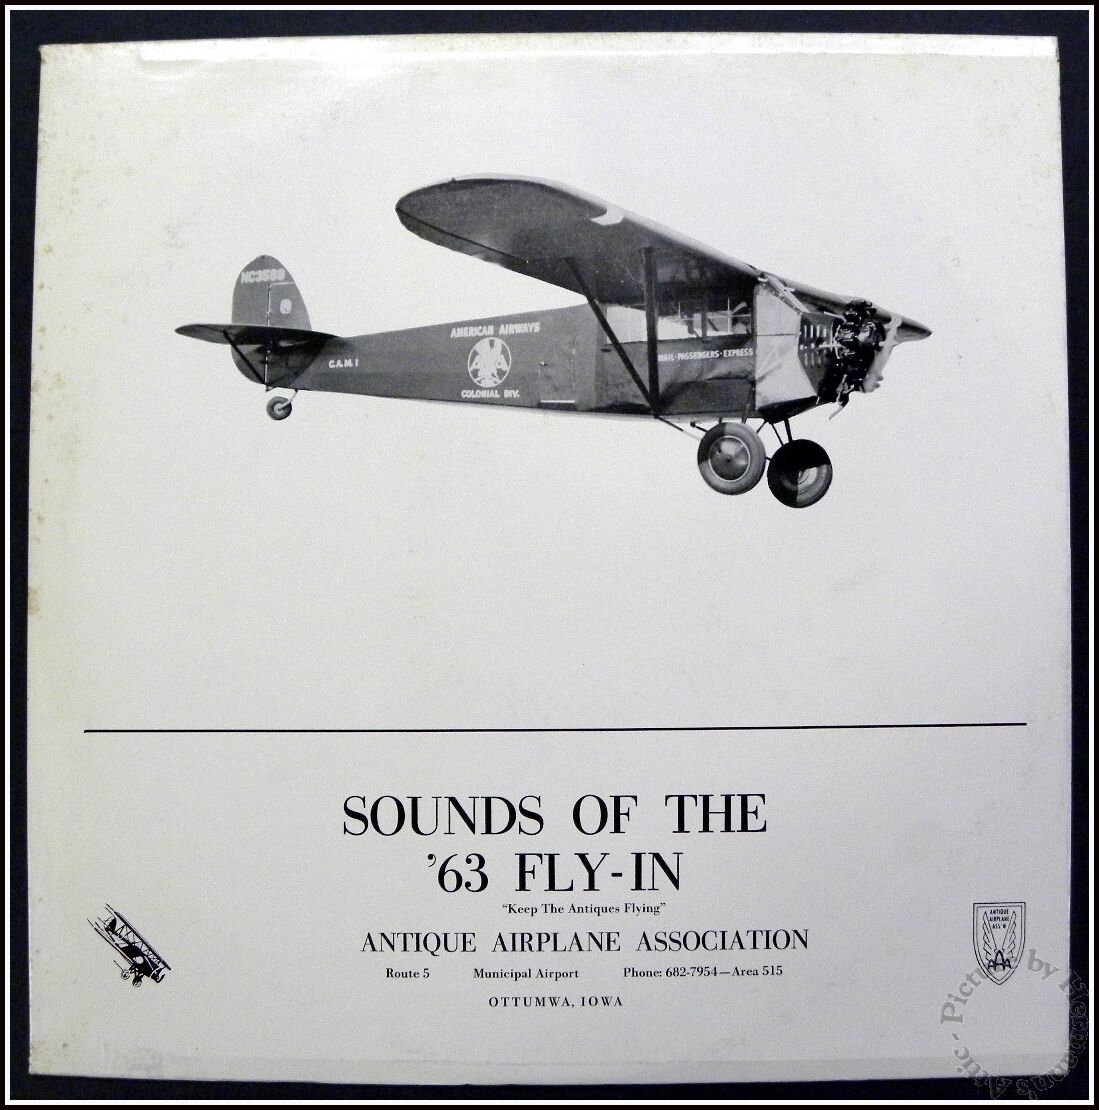 Sounds of the \'63 Fly-In, Antique Airplane Assn. Century Recording 17593 Vinyl